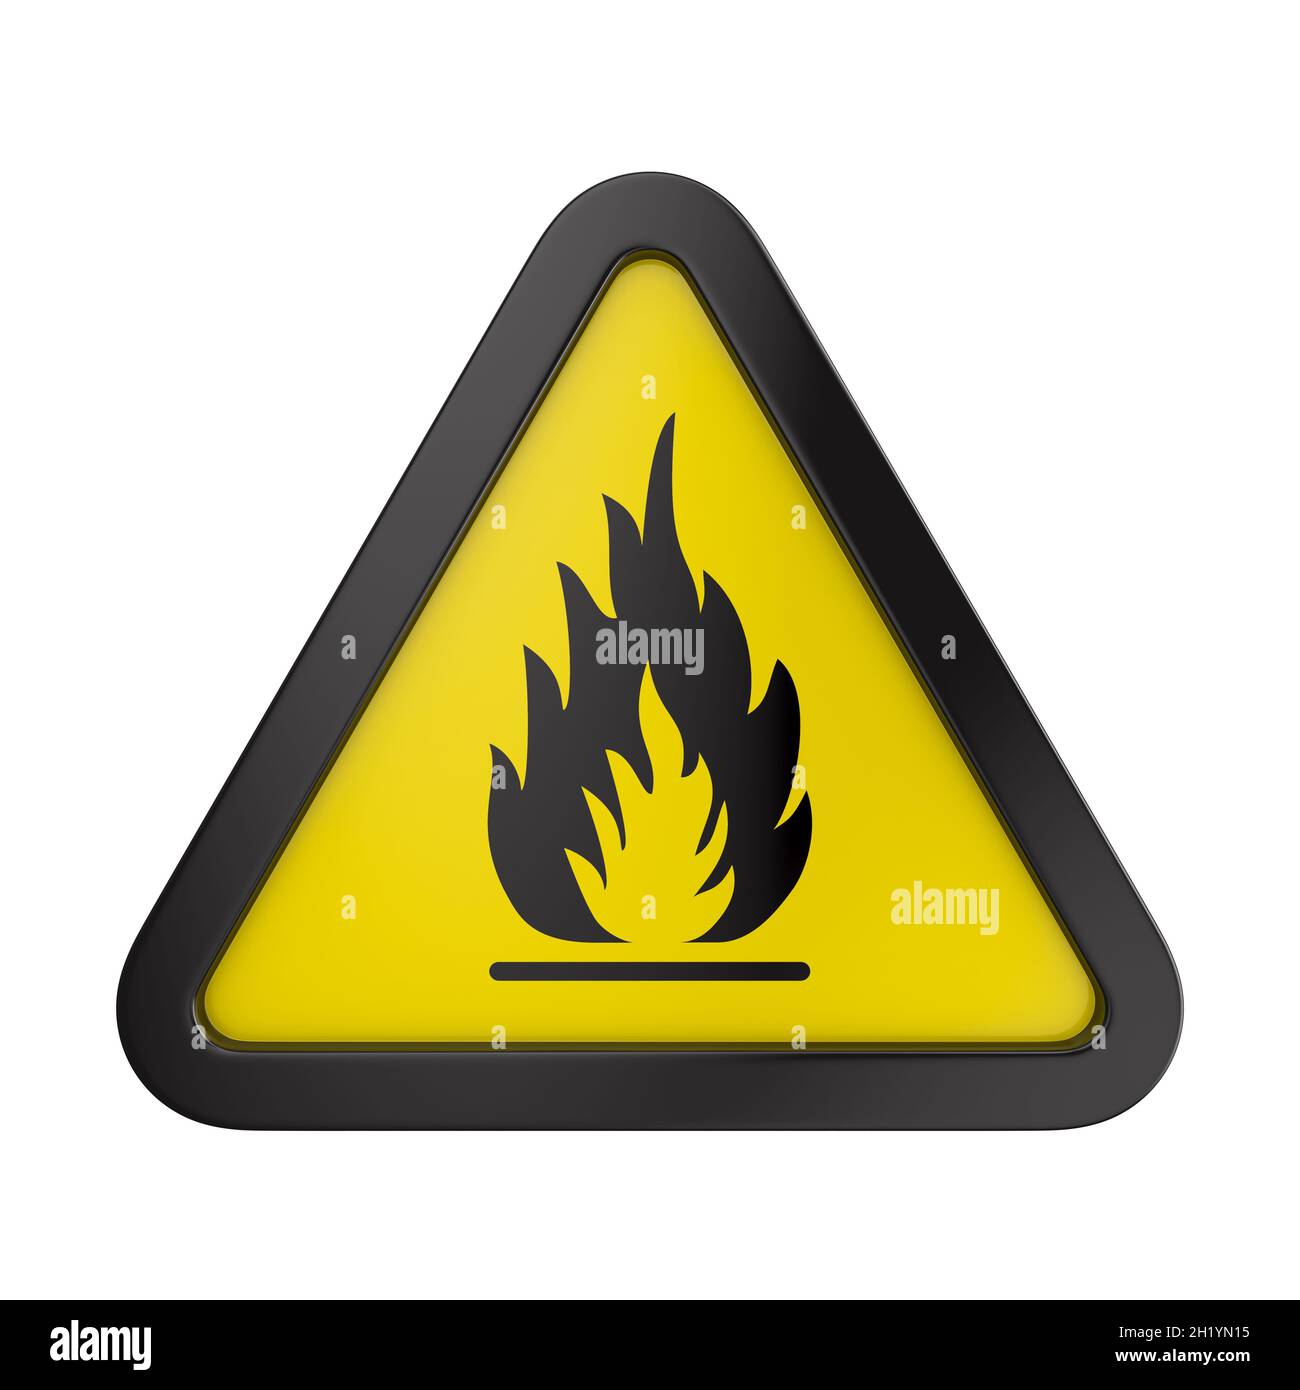 Fire warning sign in yellow triangle. Flammable, inflammable substances ...